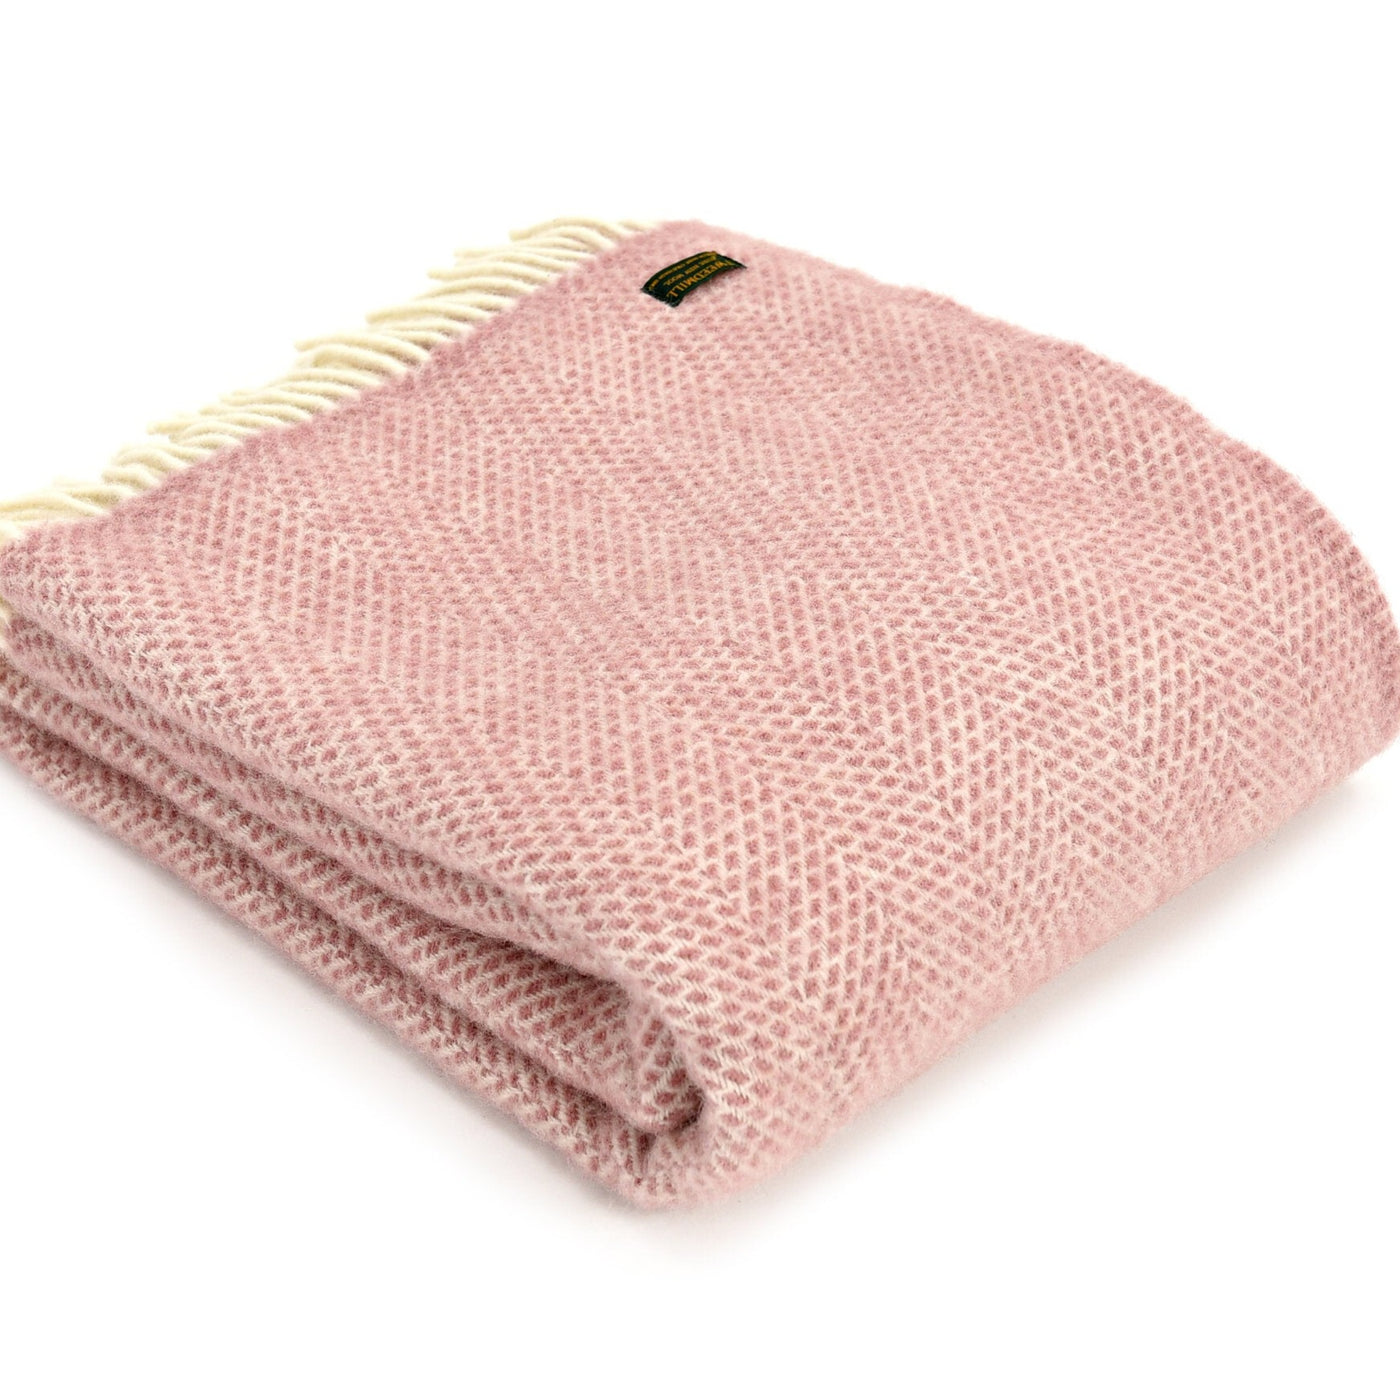 Dusty Pink Beehive weave Pure New Wool Throw